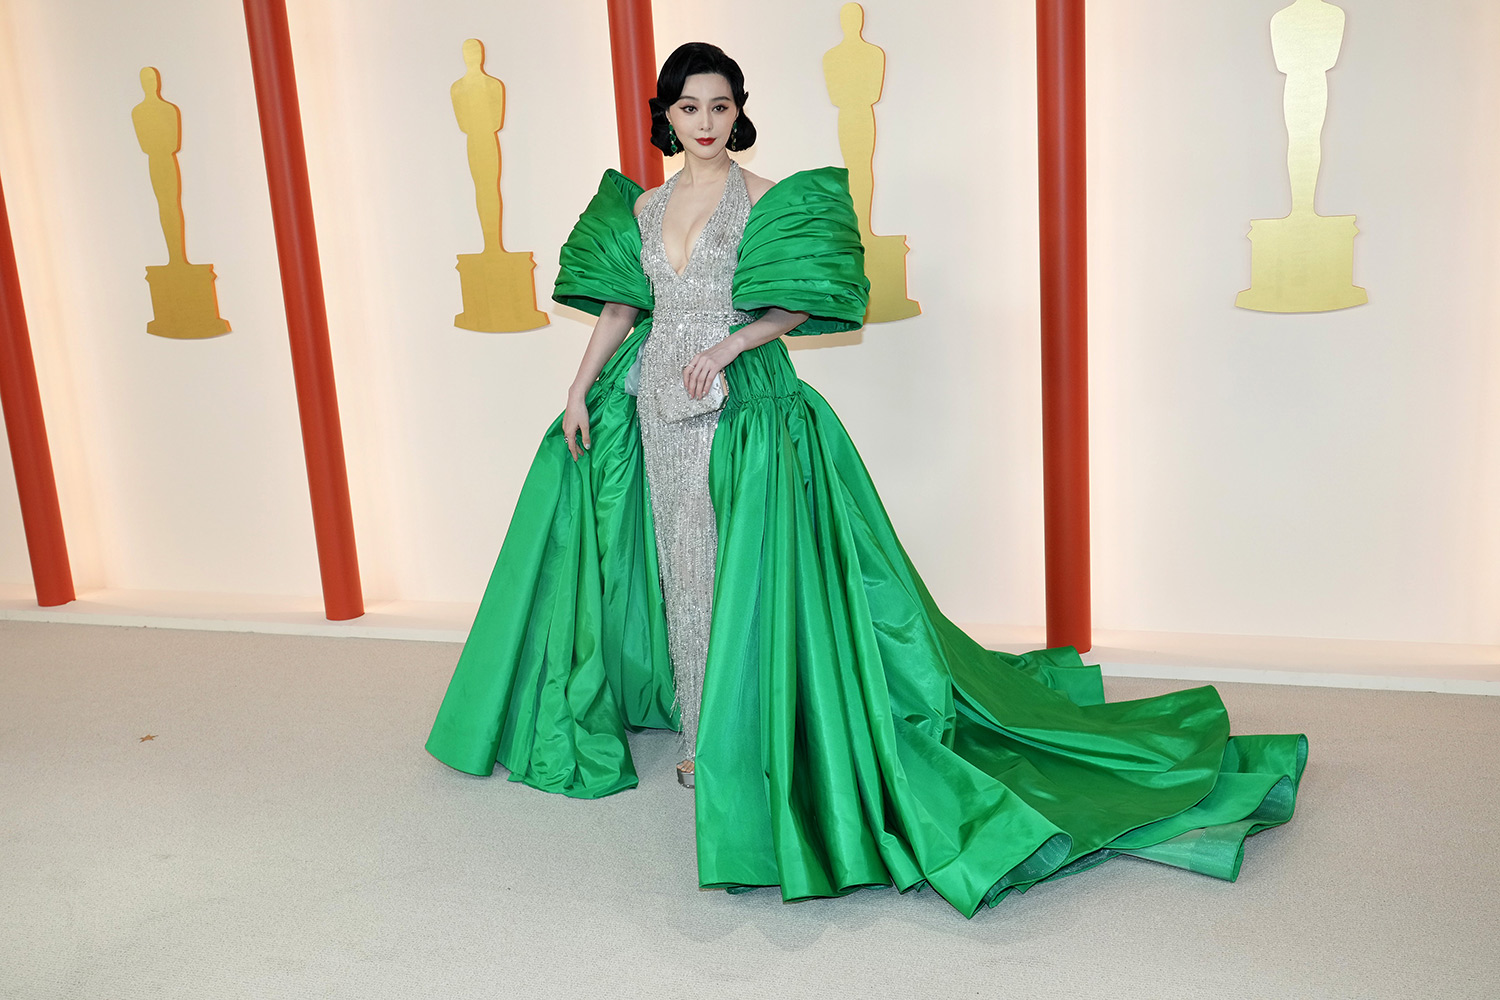 Fan Bing Bing The Oscars 2023 red carpet at the 95th Annual Academy Awards on March 12, 2023 in Hollywood, California.